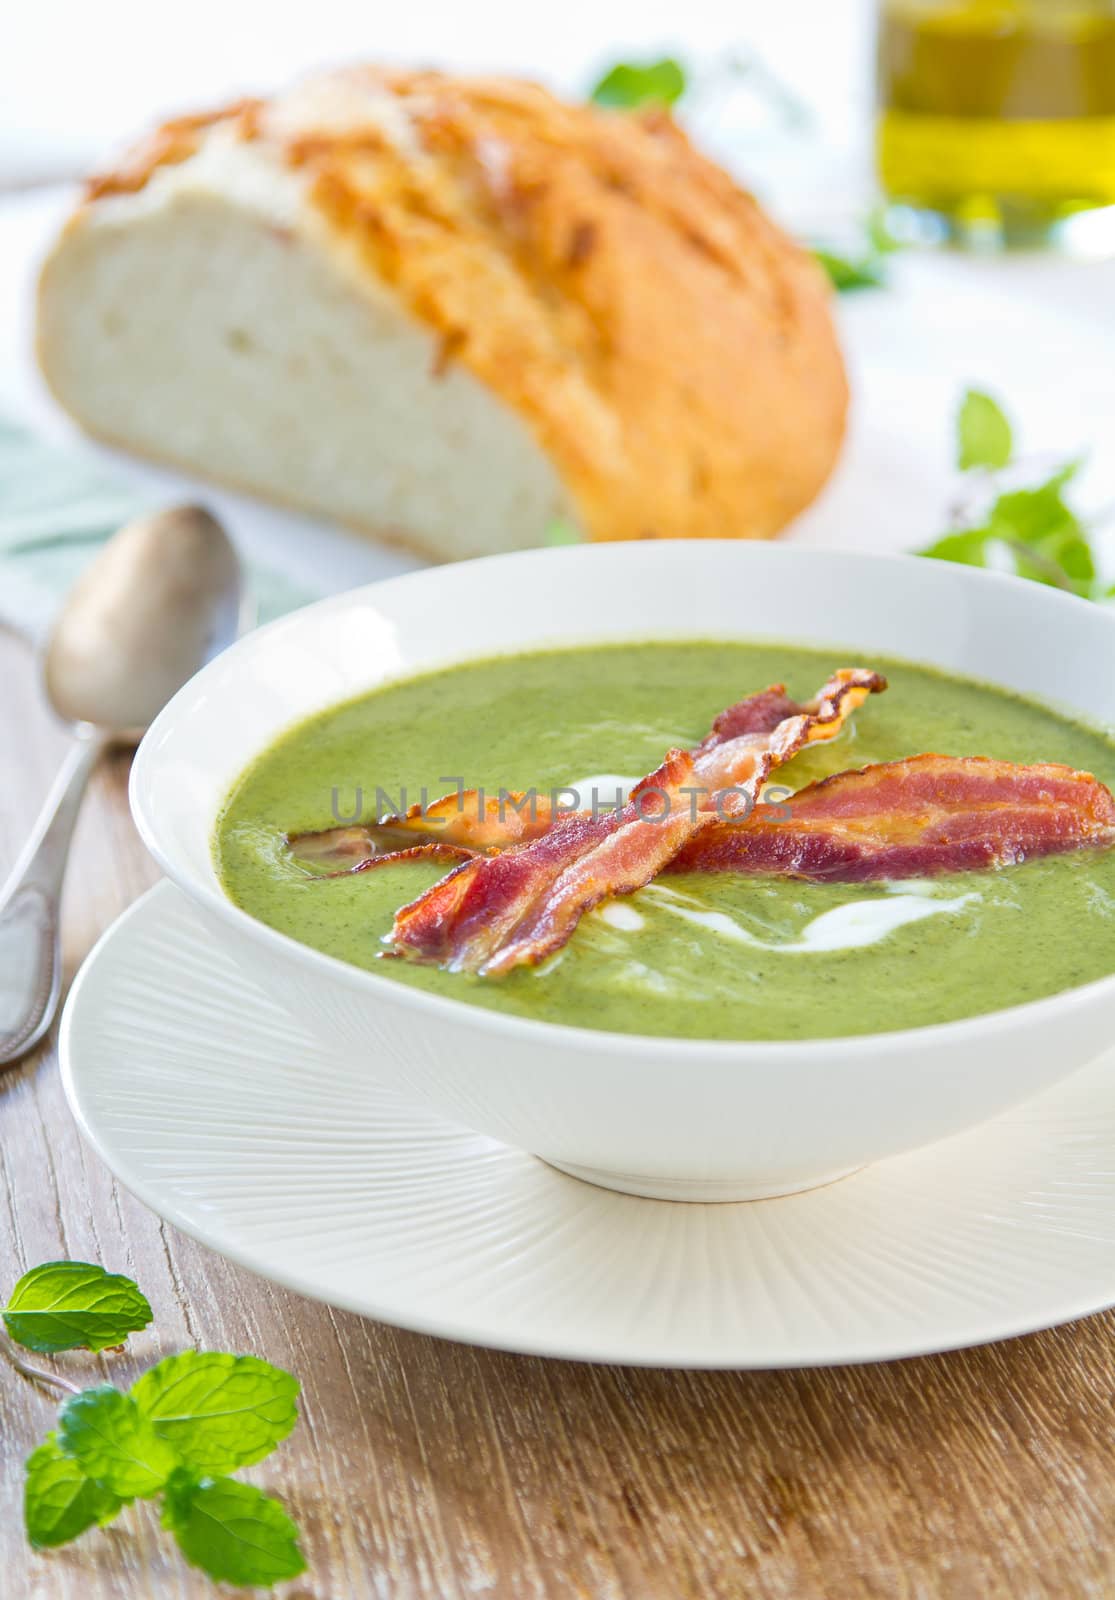 Pea,mint and celery soup with cream and bacon on top by a loaf of bread